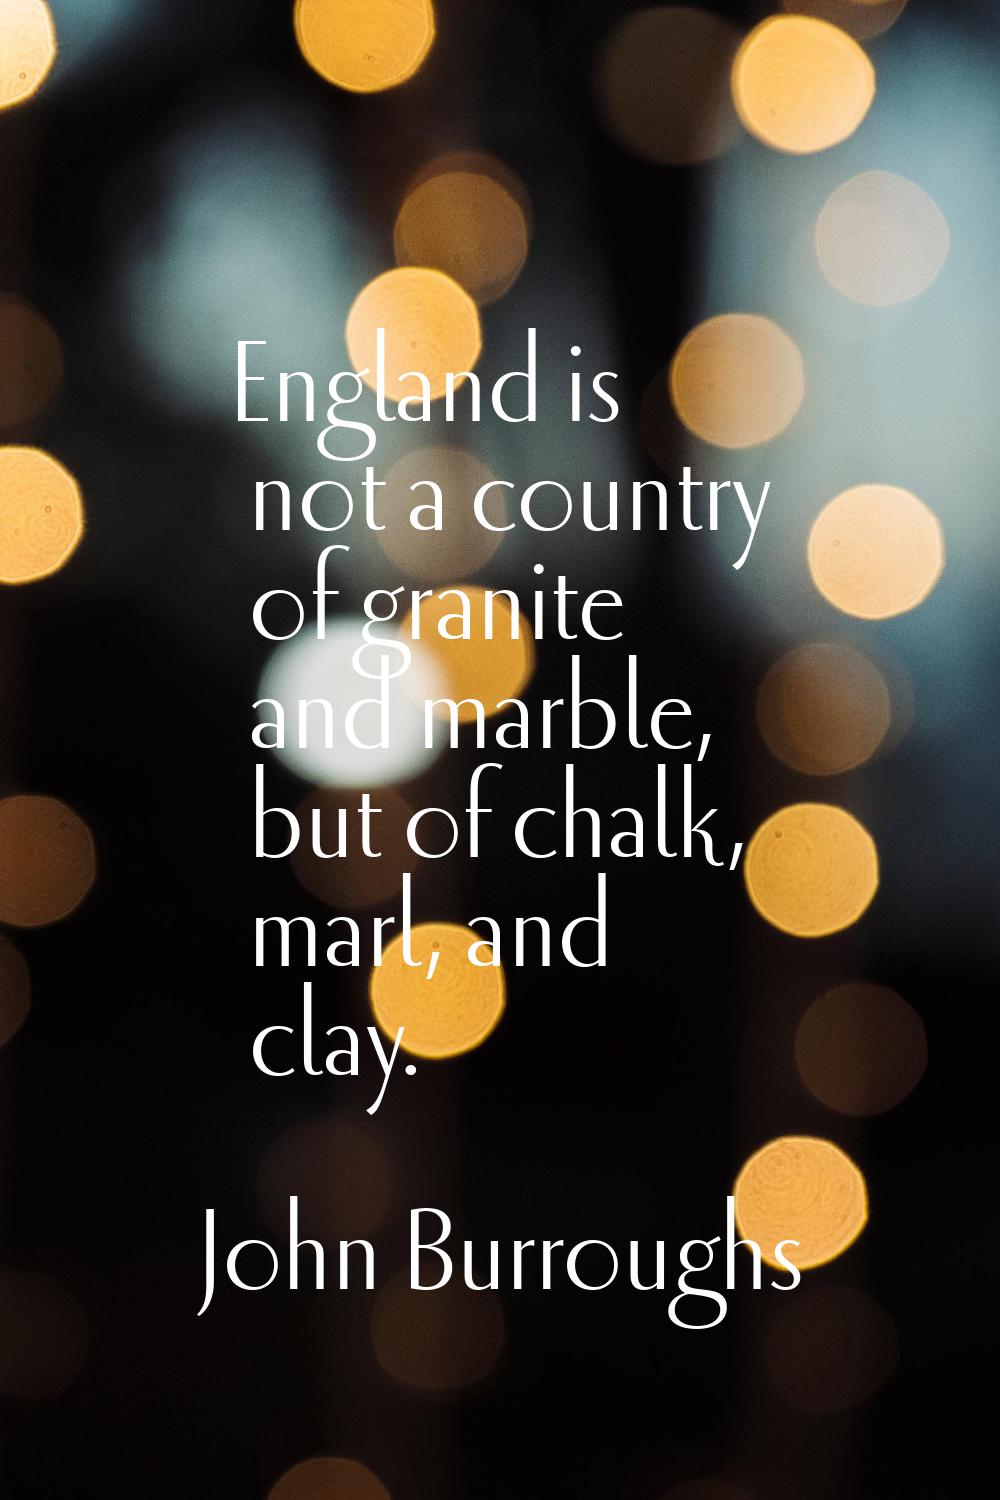 England is not a country of granite and marble, but of chalk, marl, and clay.